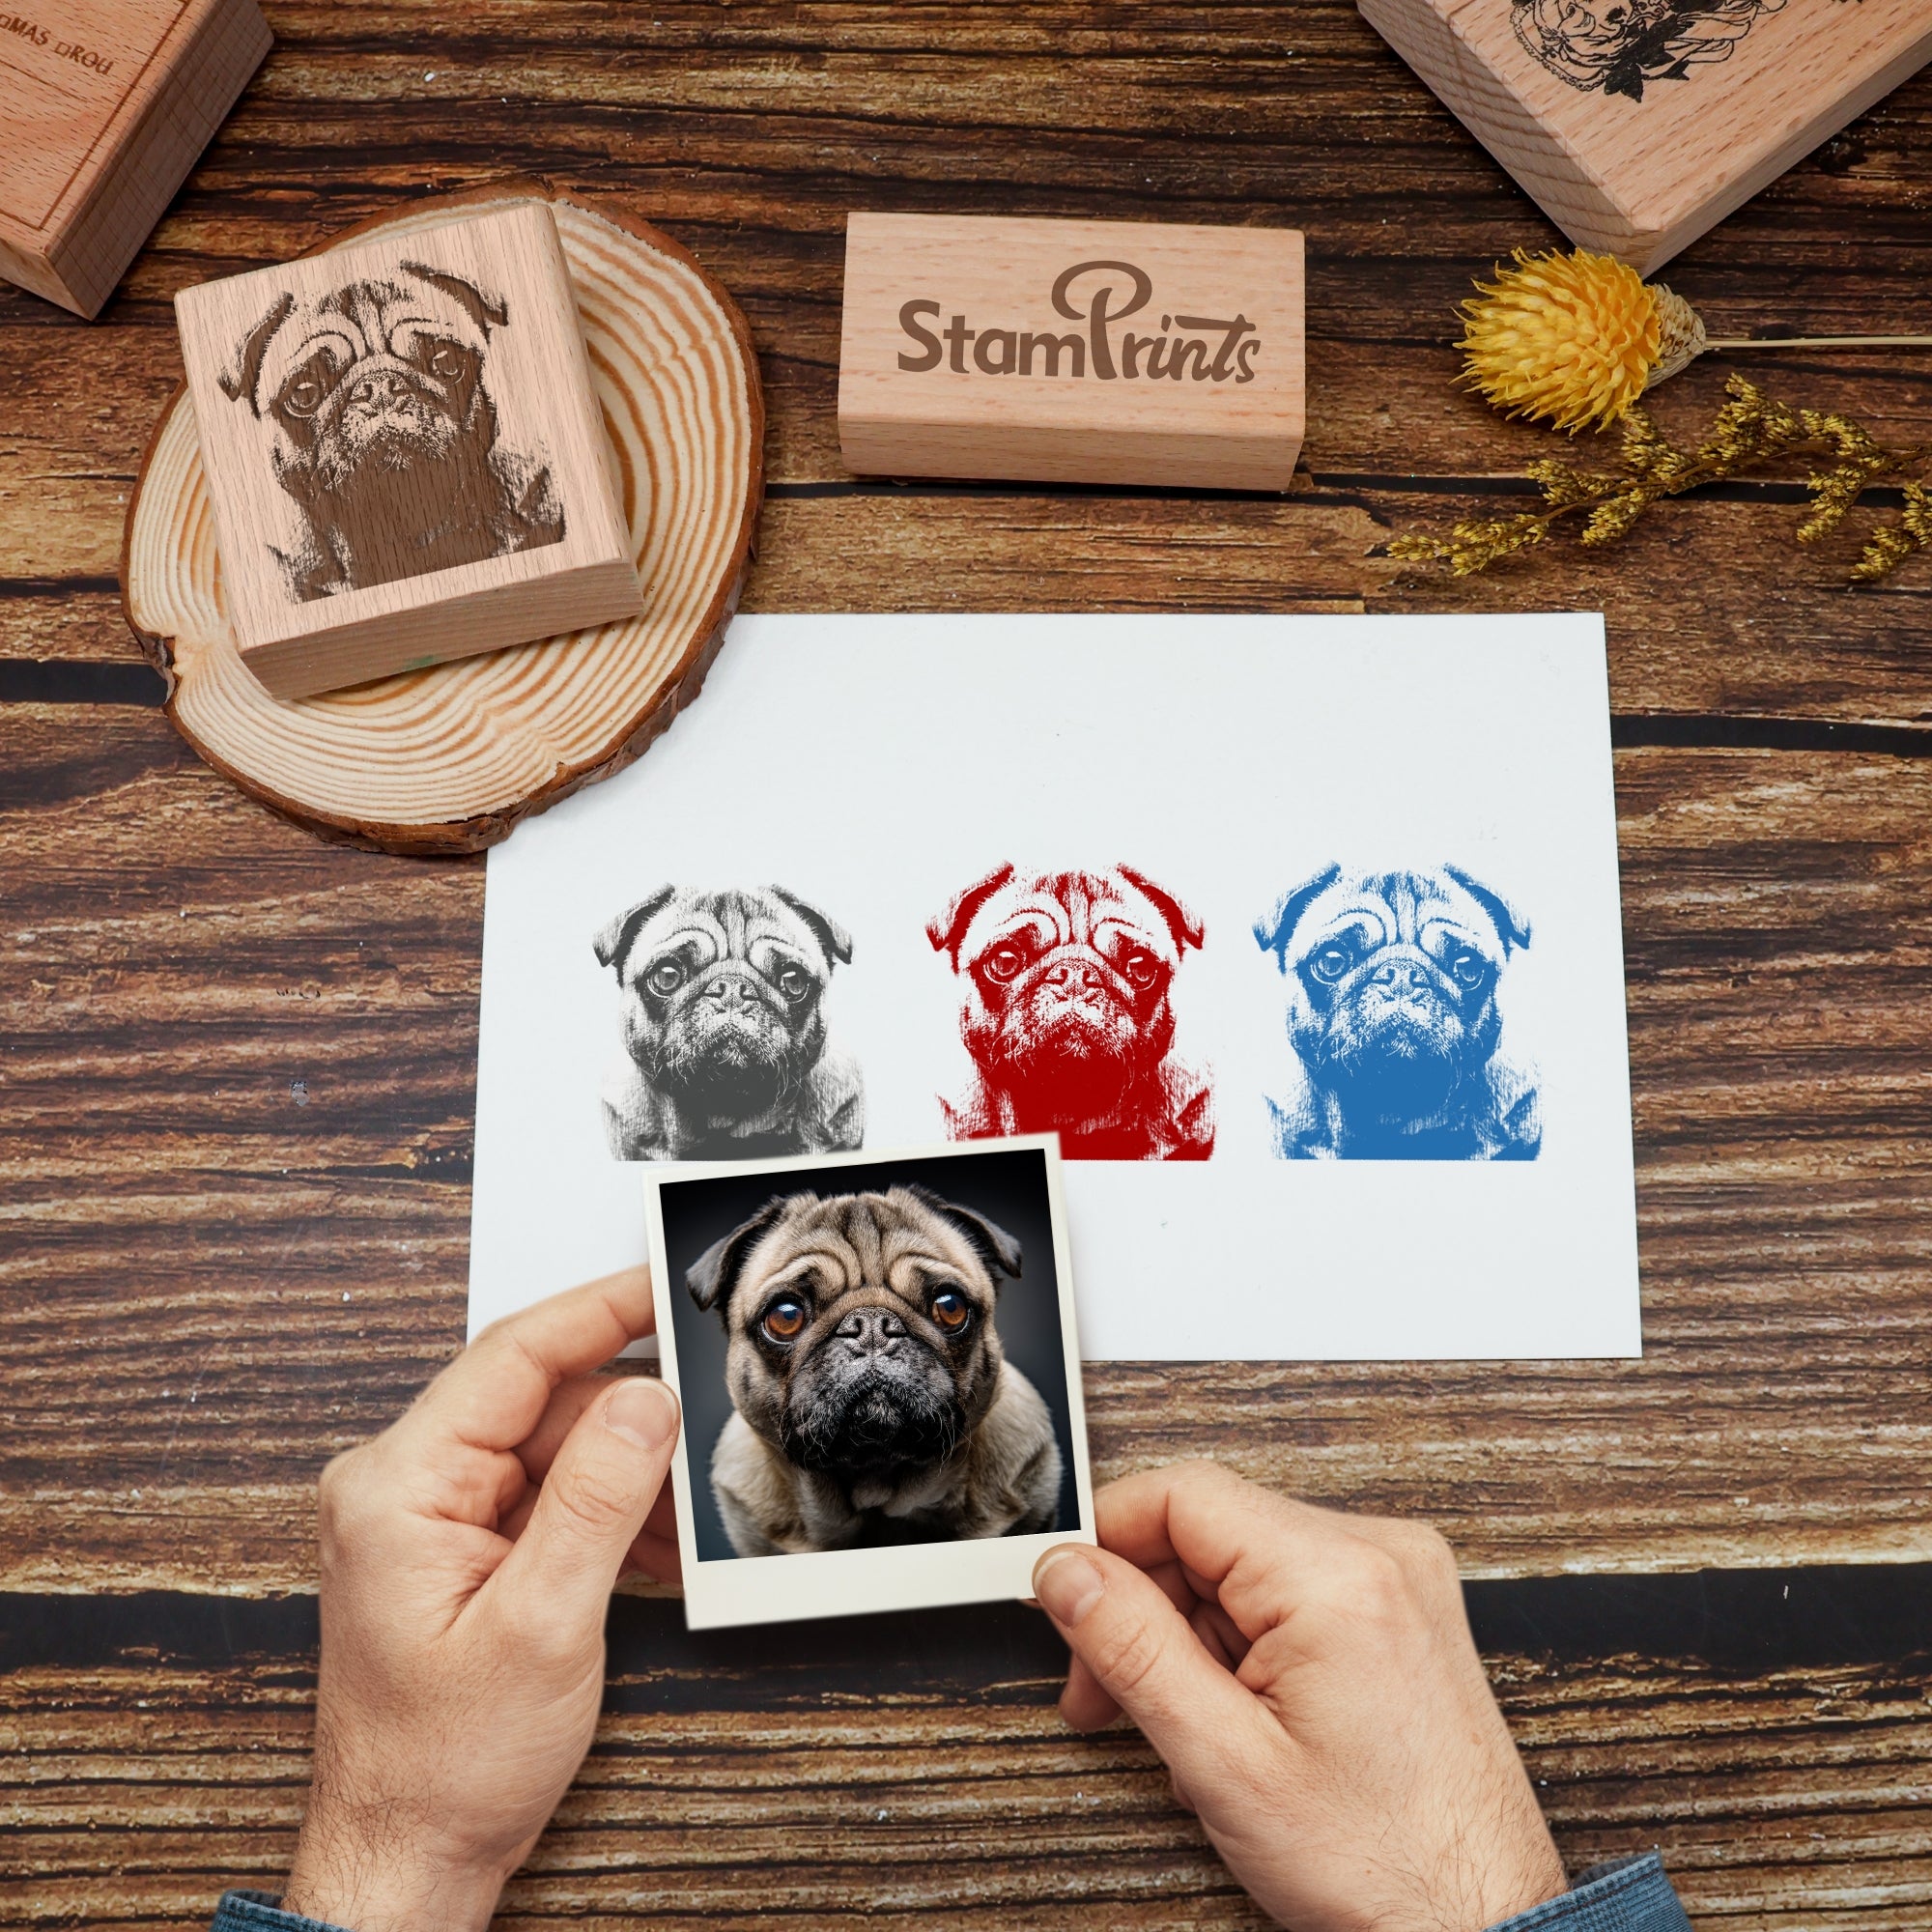 stamps online free  Personalized stamps, Stamp maker, Custom stamps